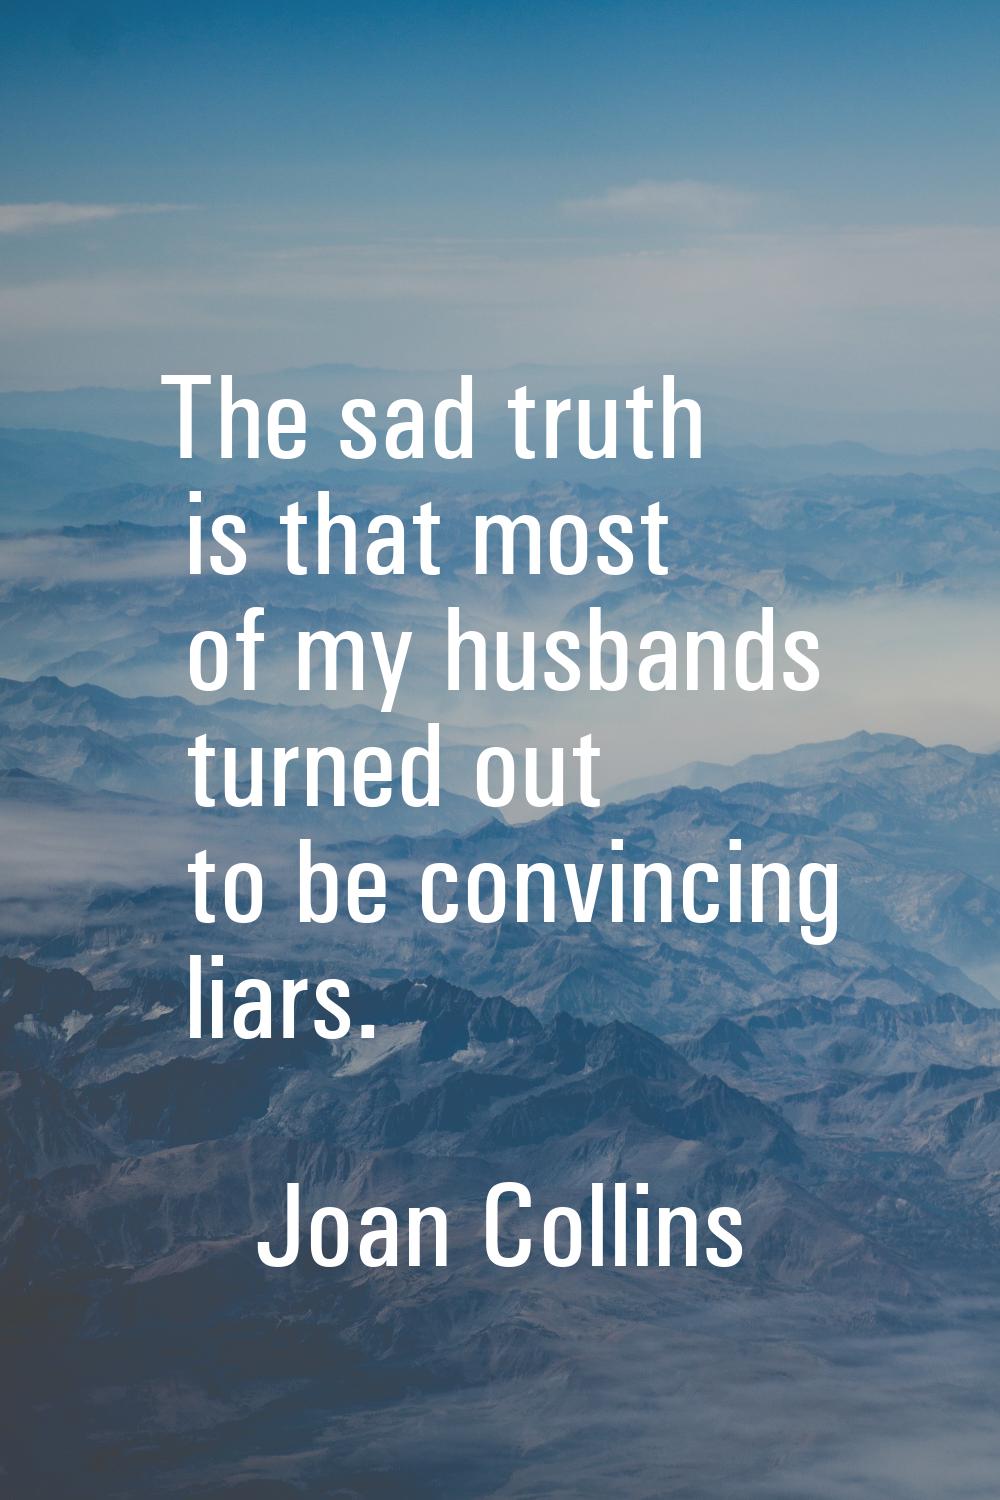 The sad truth is that most of my husbands turned out to be convincing liars.